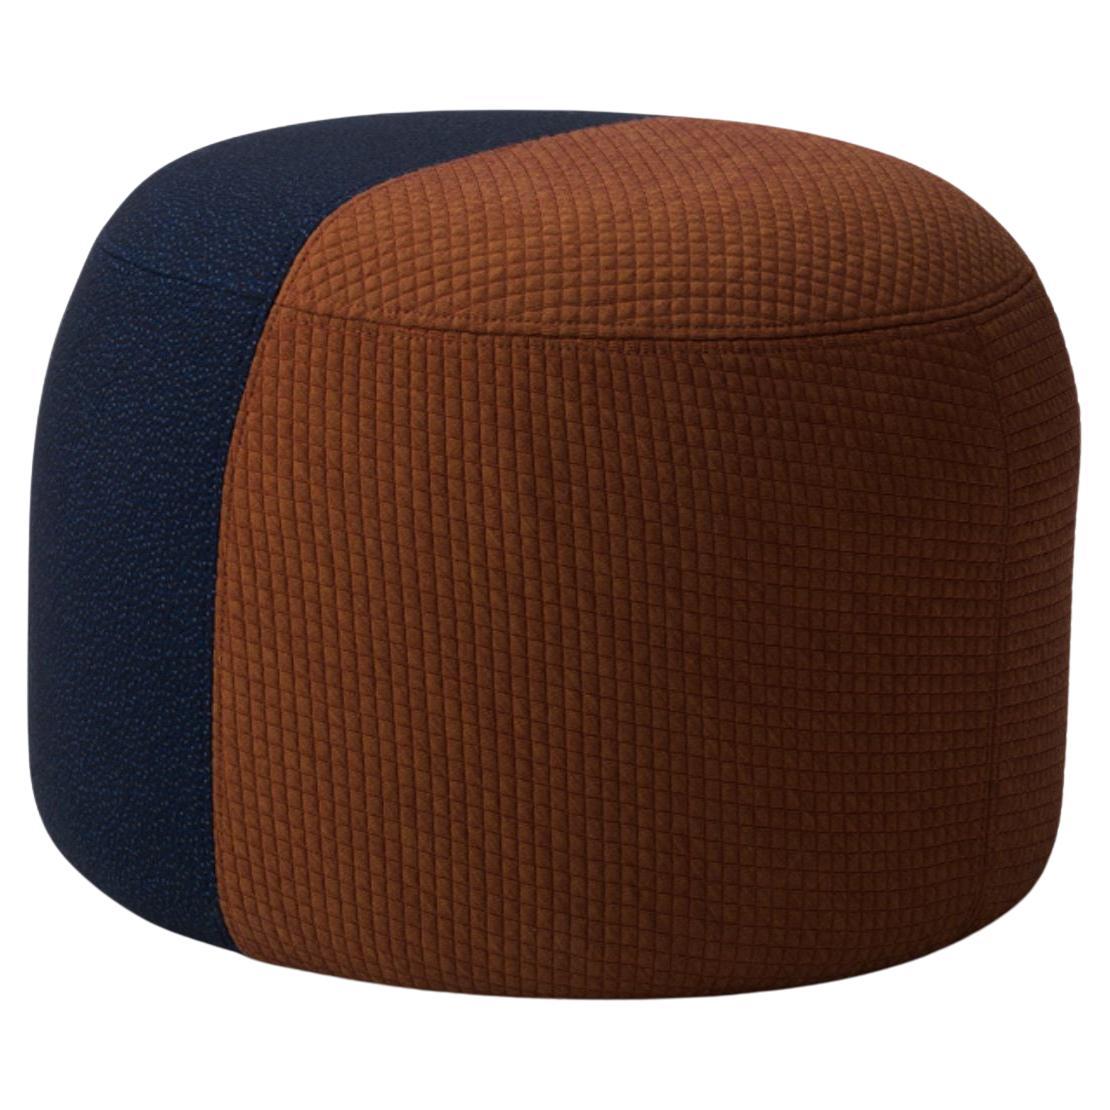 Dainty Pouf Mosaic Sprinkles Rusty Midnight Blue by Warm Nordic